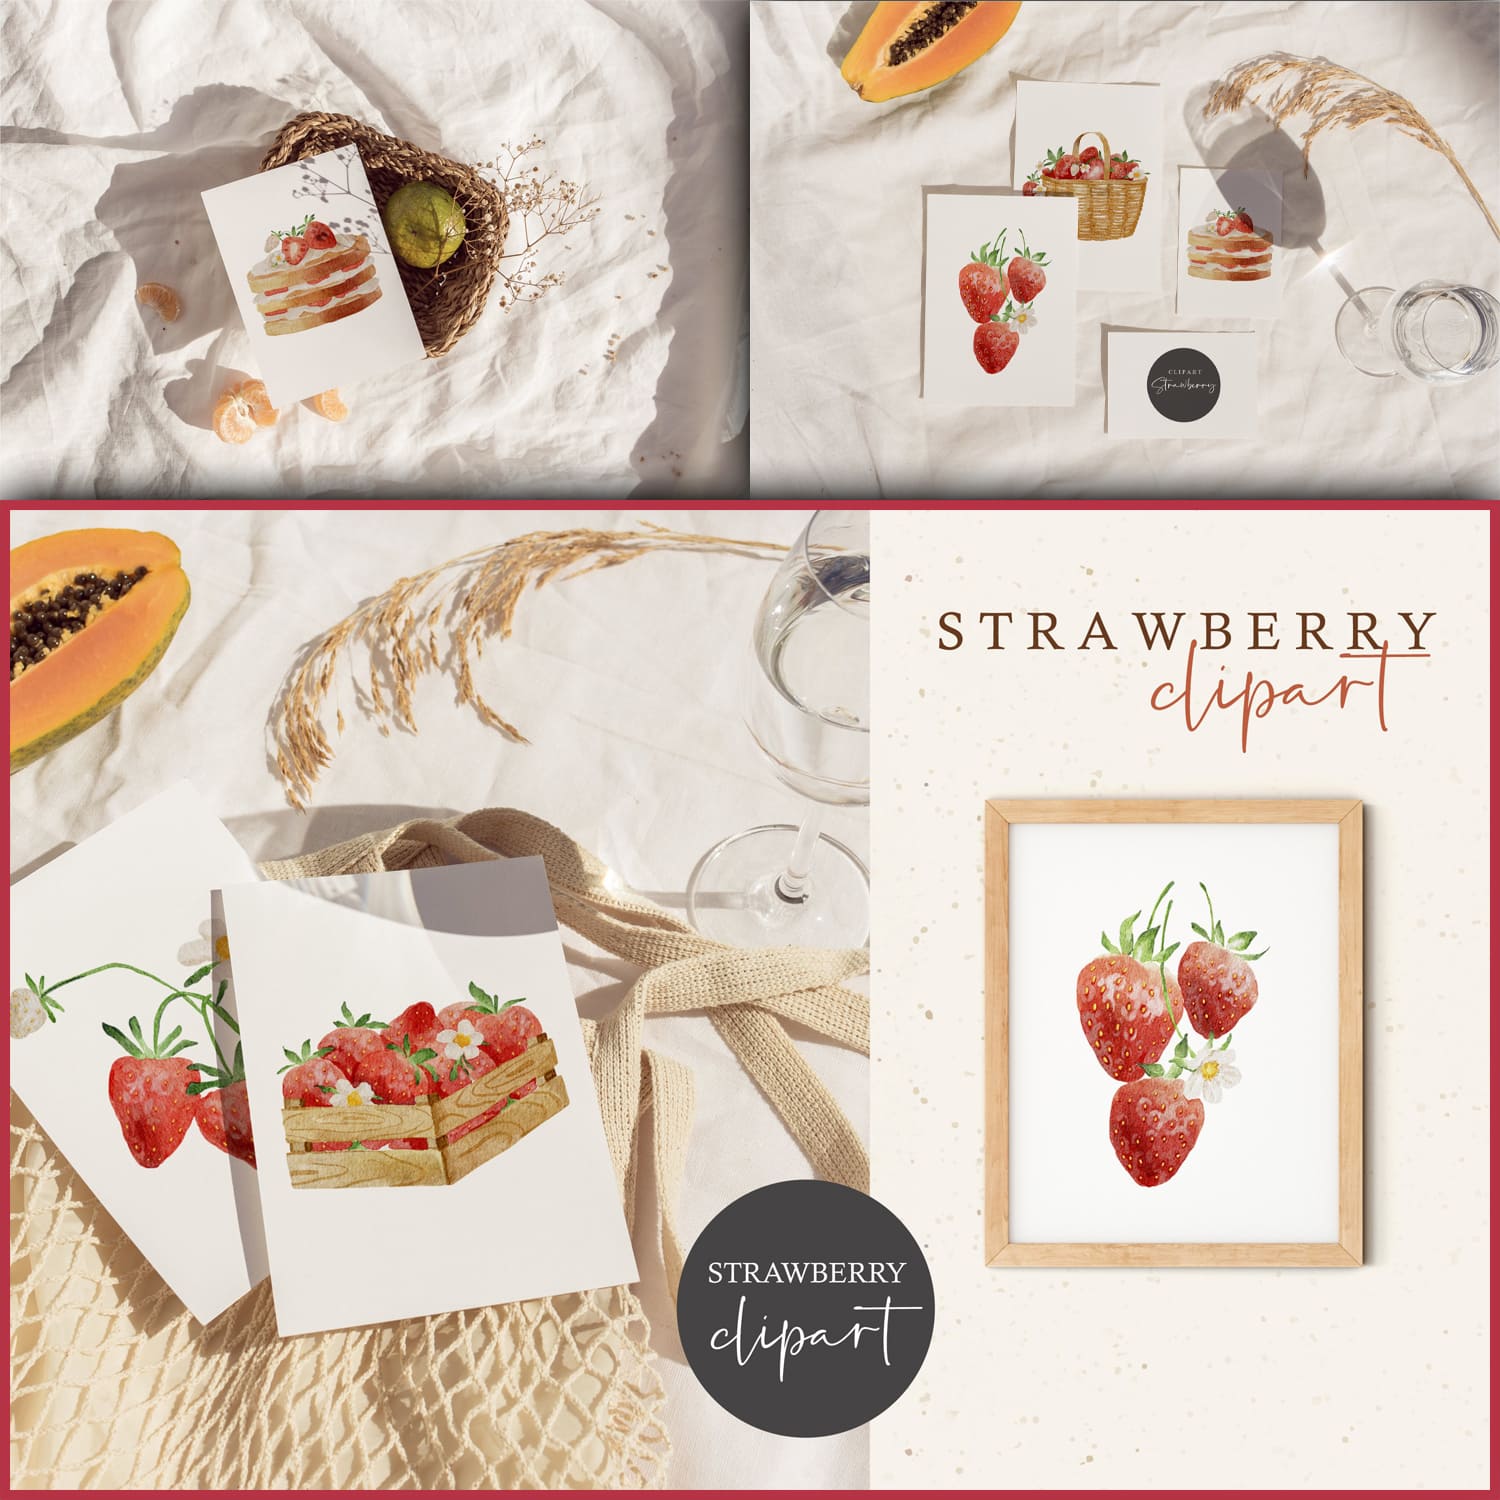 An exotic fruit, a fabric bag and postcards with a strawberry painted in watercolor lie on a white cloth.